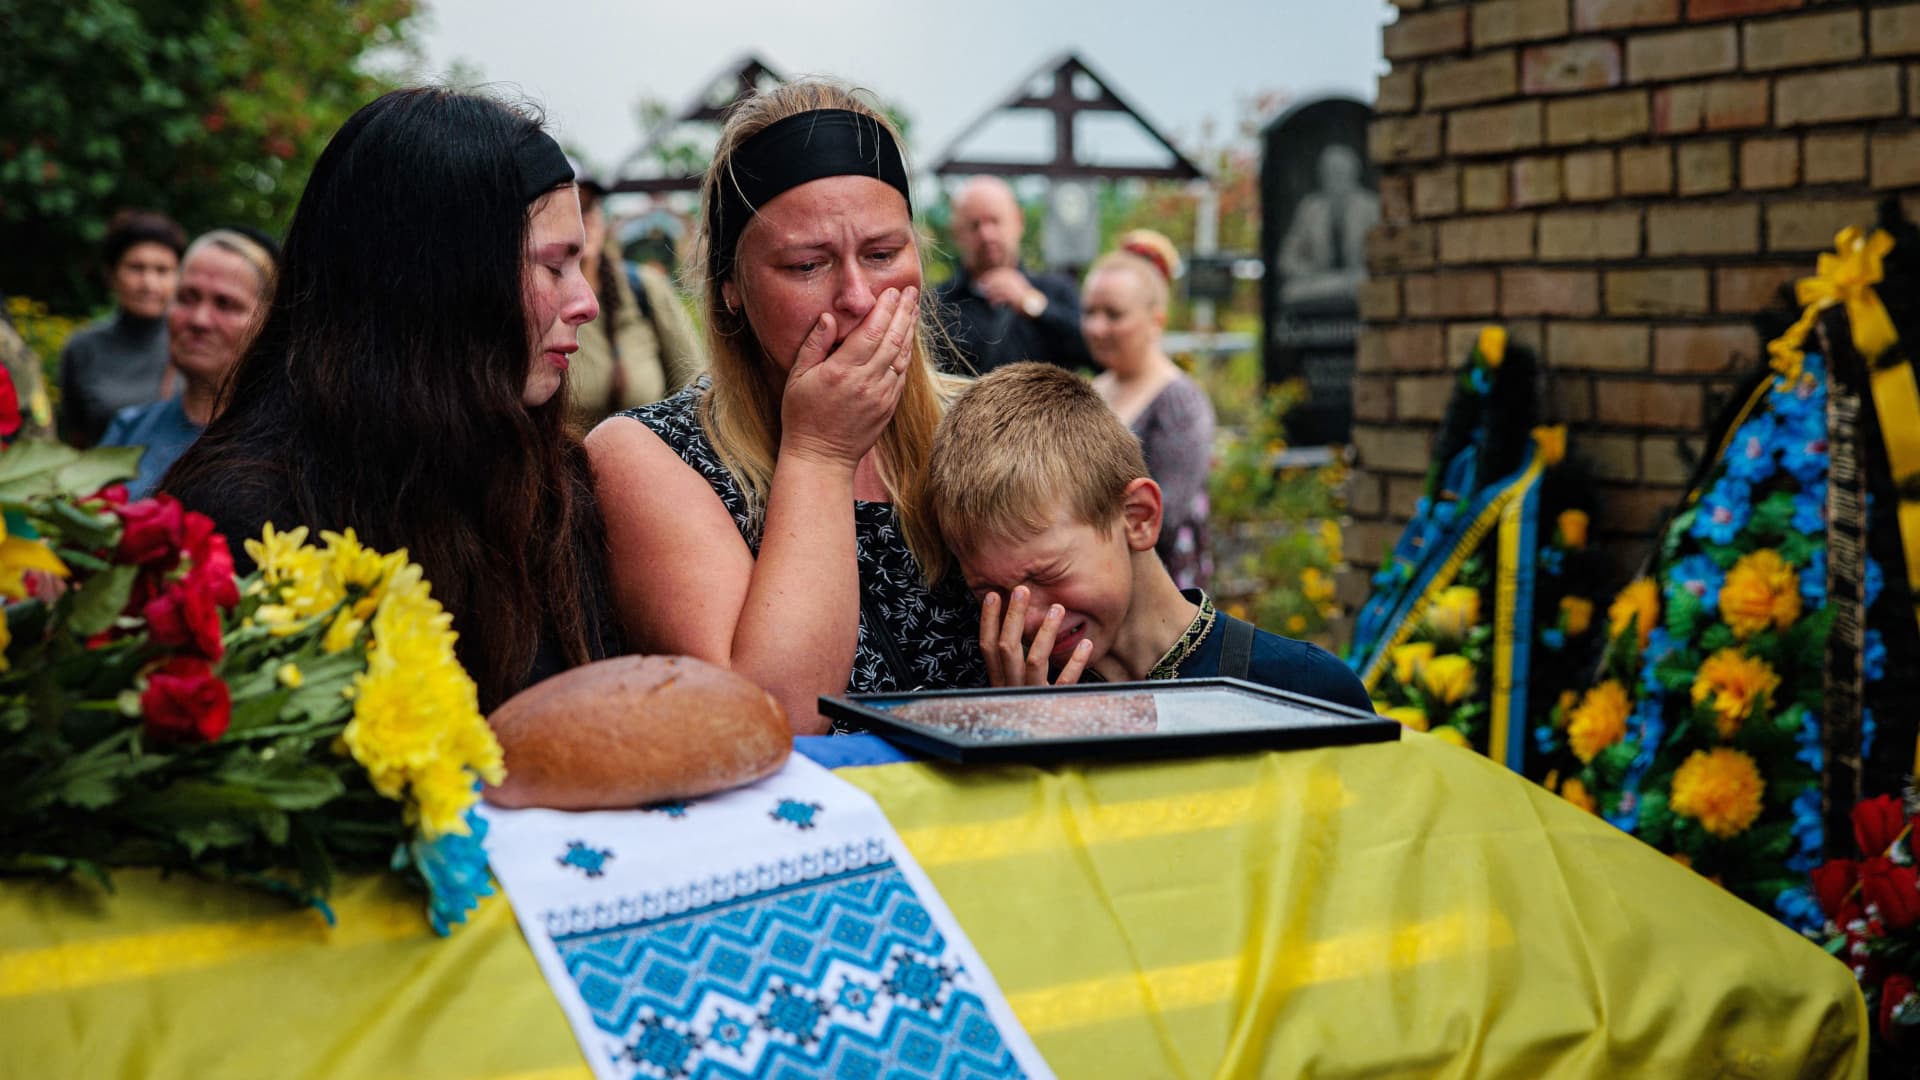 TOPSHOT - Family members mourn next to the coffin of Ukrainian serviceman Anton Savytskyi during a funeral ceremony at Bucha's cemetery in Kyiv region on August 13, 2022, amid the Russian military invasion of Ukraine.